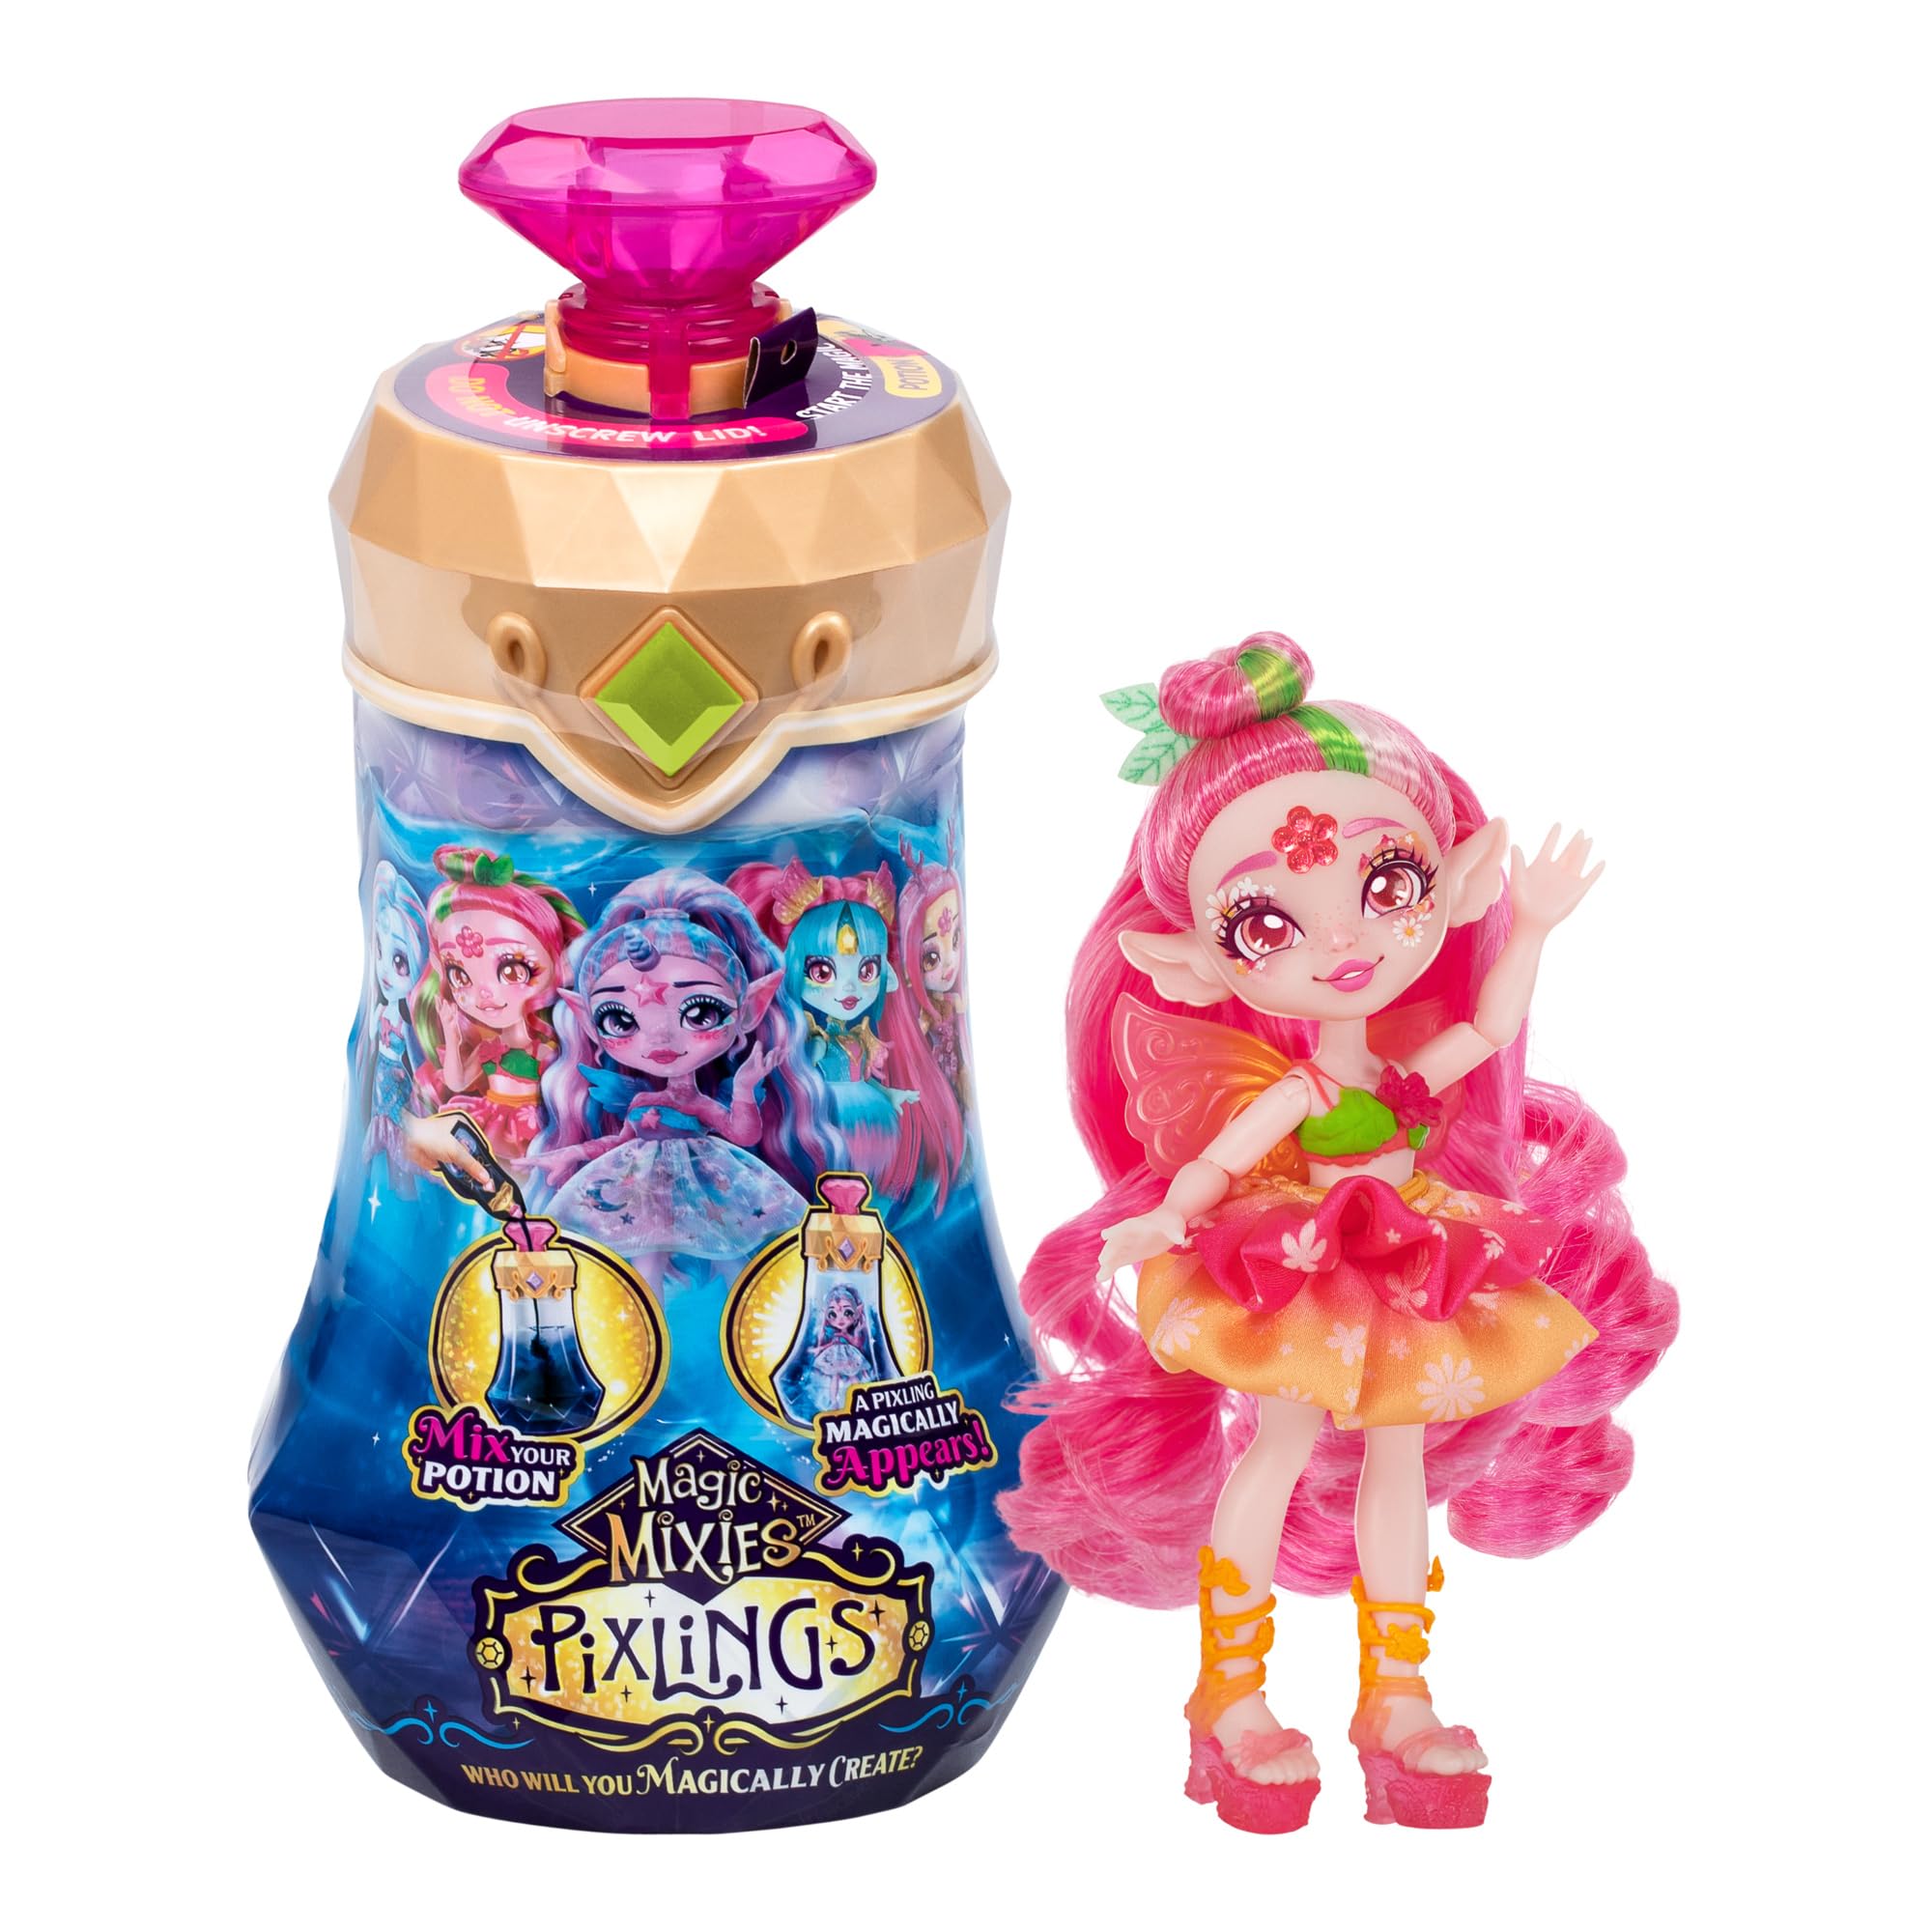 Magic Mixies Pixlings. Faye The Fairy Pixling. Create and Mix A Magic Potion That Magically Reveals A Beautiful 6.5